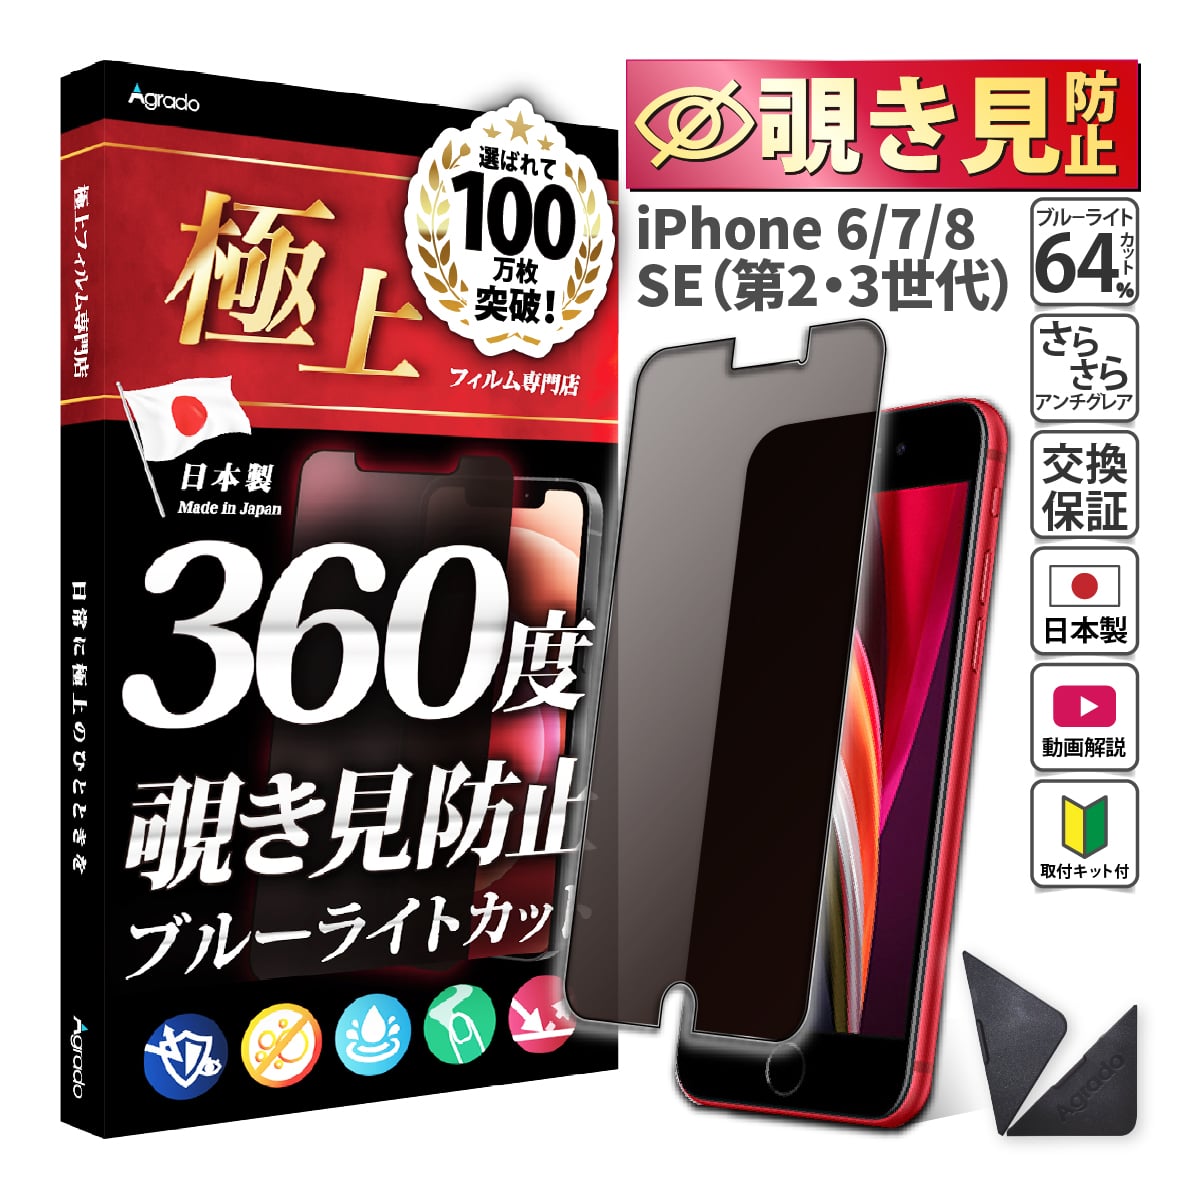 iPhoneSE 第3世代 第2世代 覗見防止 フィルム 360度 iPhoneSE ブルーライトカット フィルム 覗き見防止 フィルム さらさら 極上 iPhone8 iPhone7 iPhone6